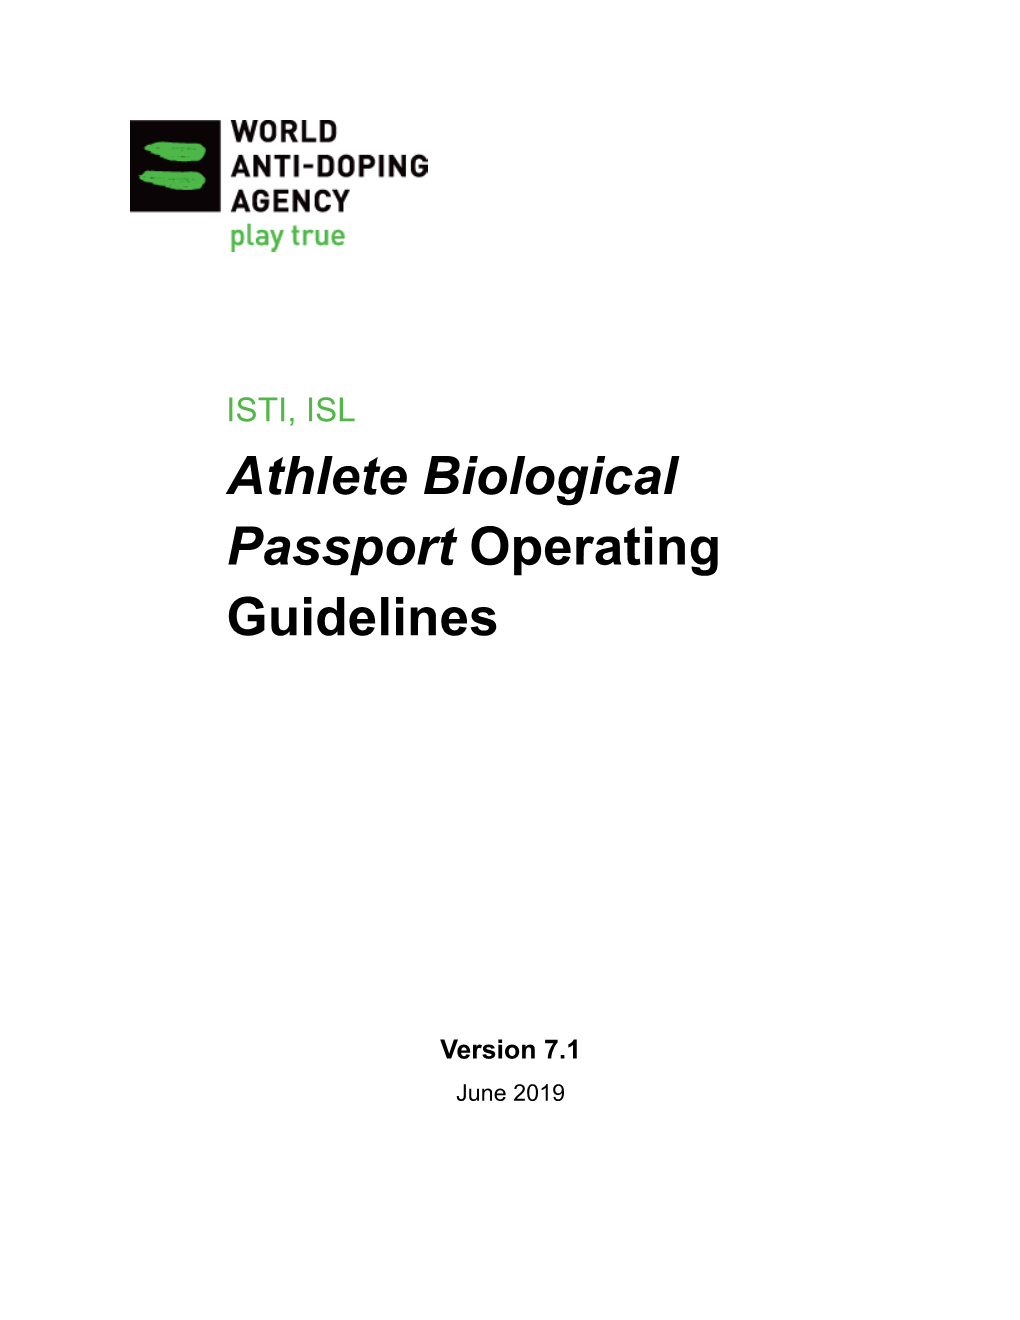 Athlete Biological Passport Operating Guidelines